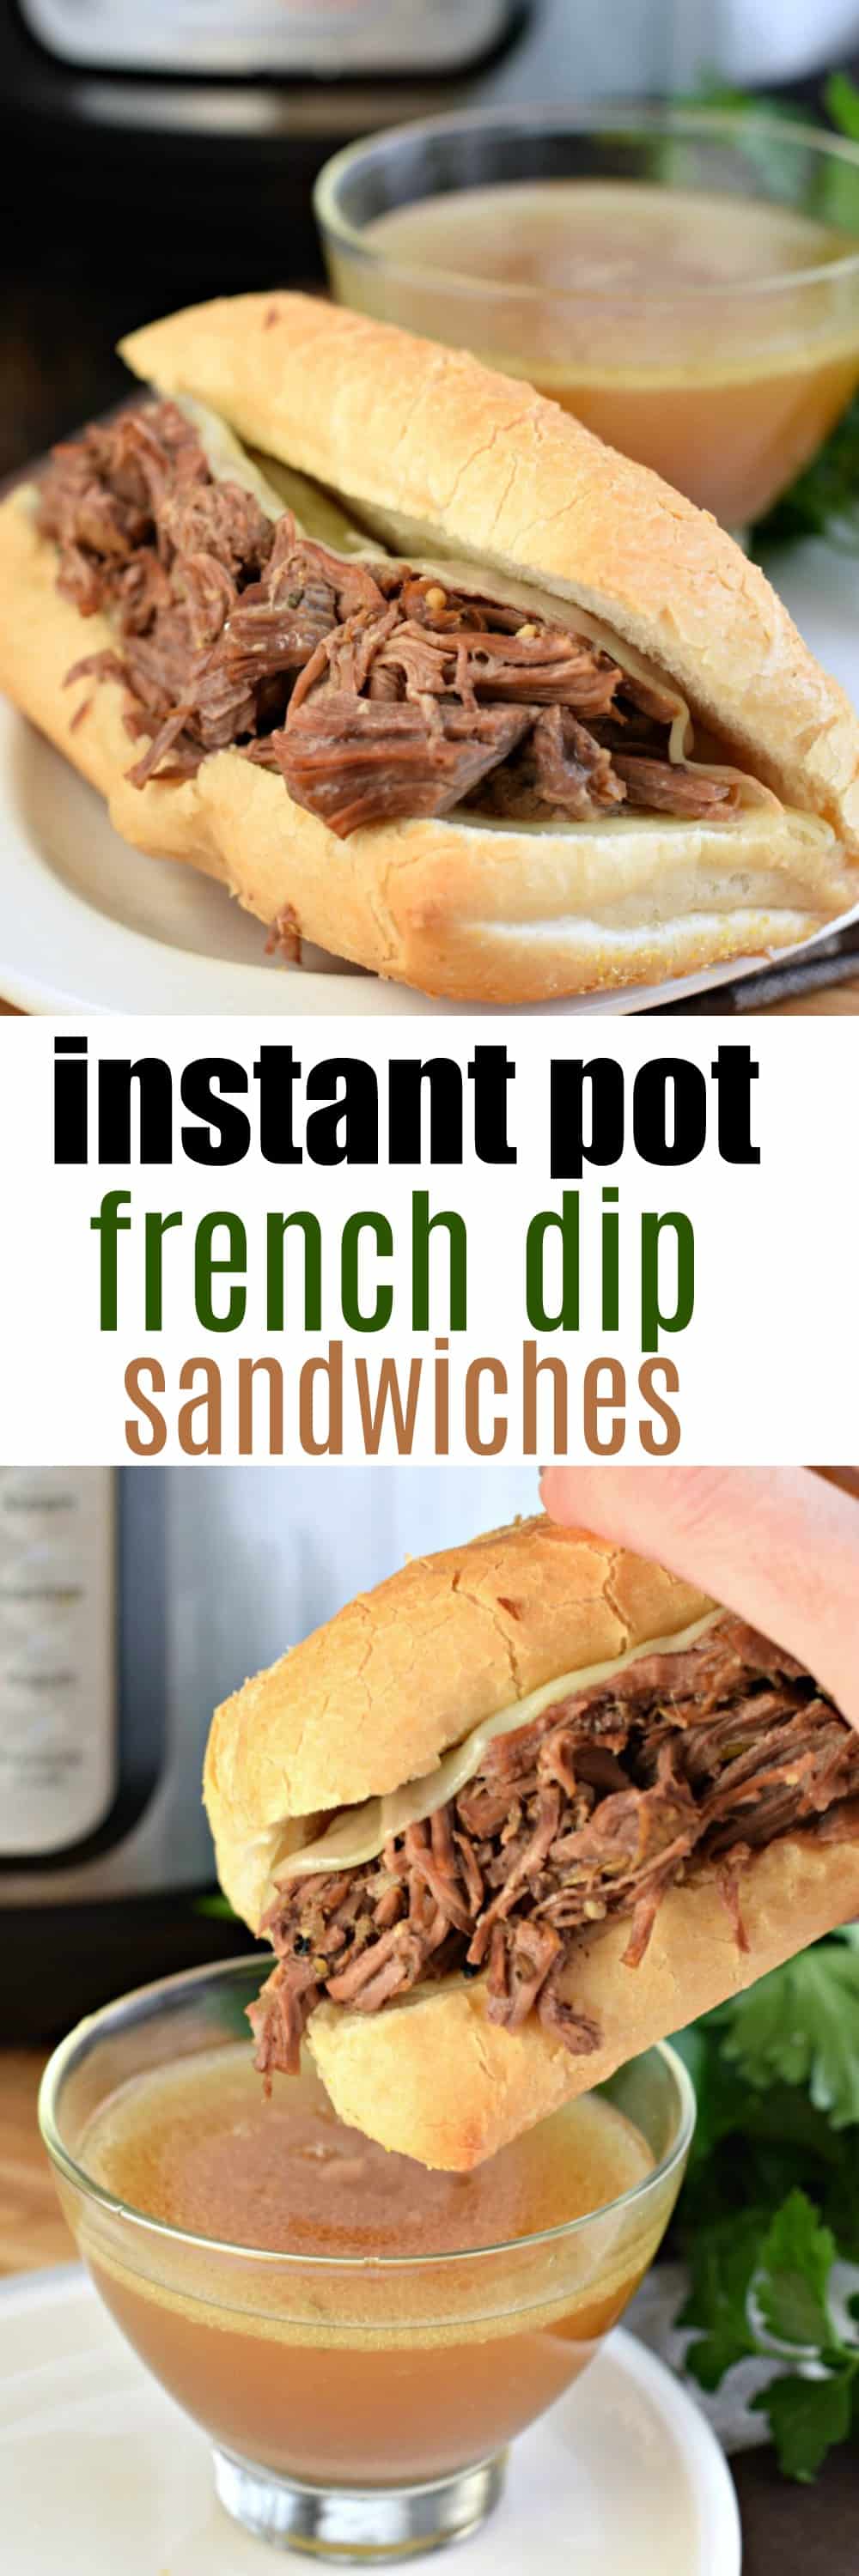 The Best Instant Pot French Dip Sandwiches Recipe